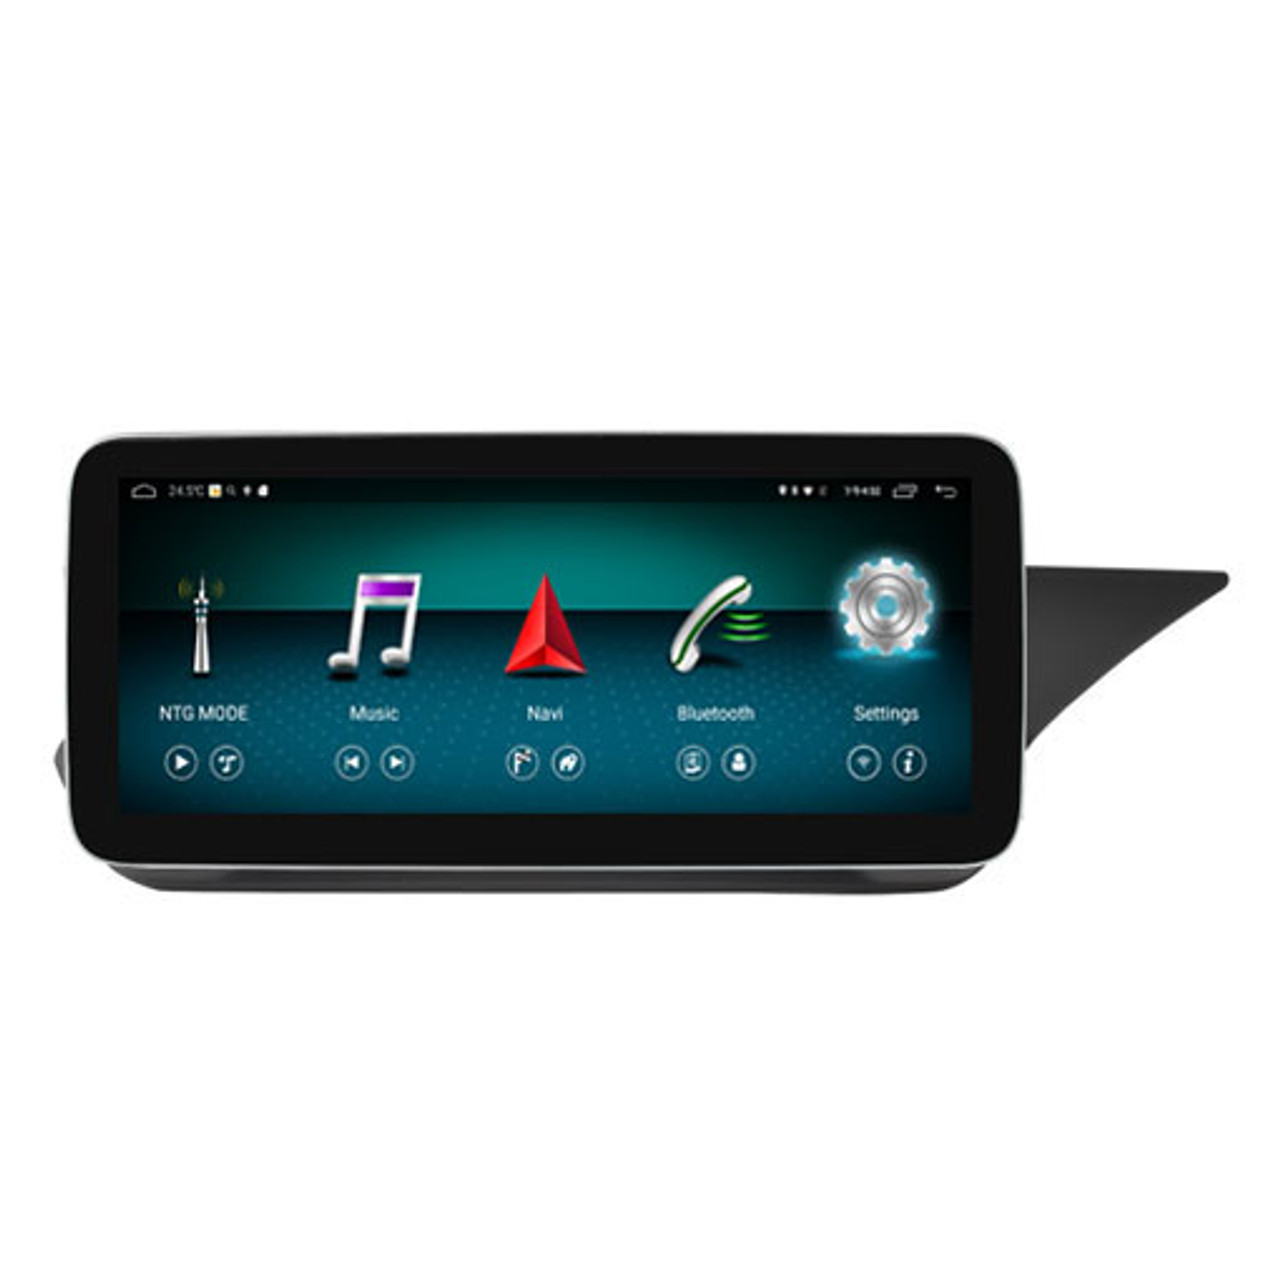 Airplay Miracast Mirror Link Box Connects Samrtphone to the Car TFT